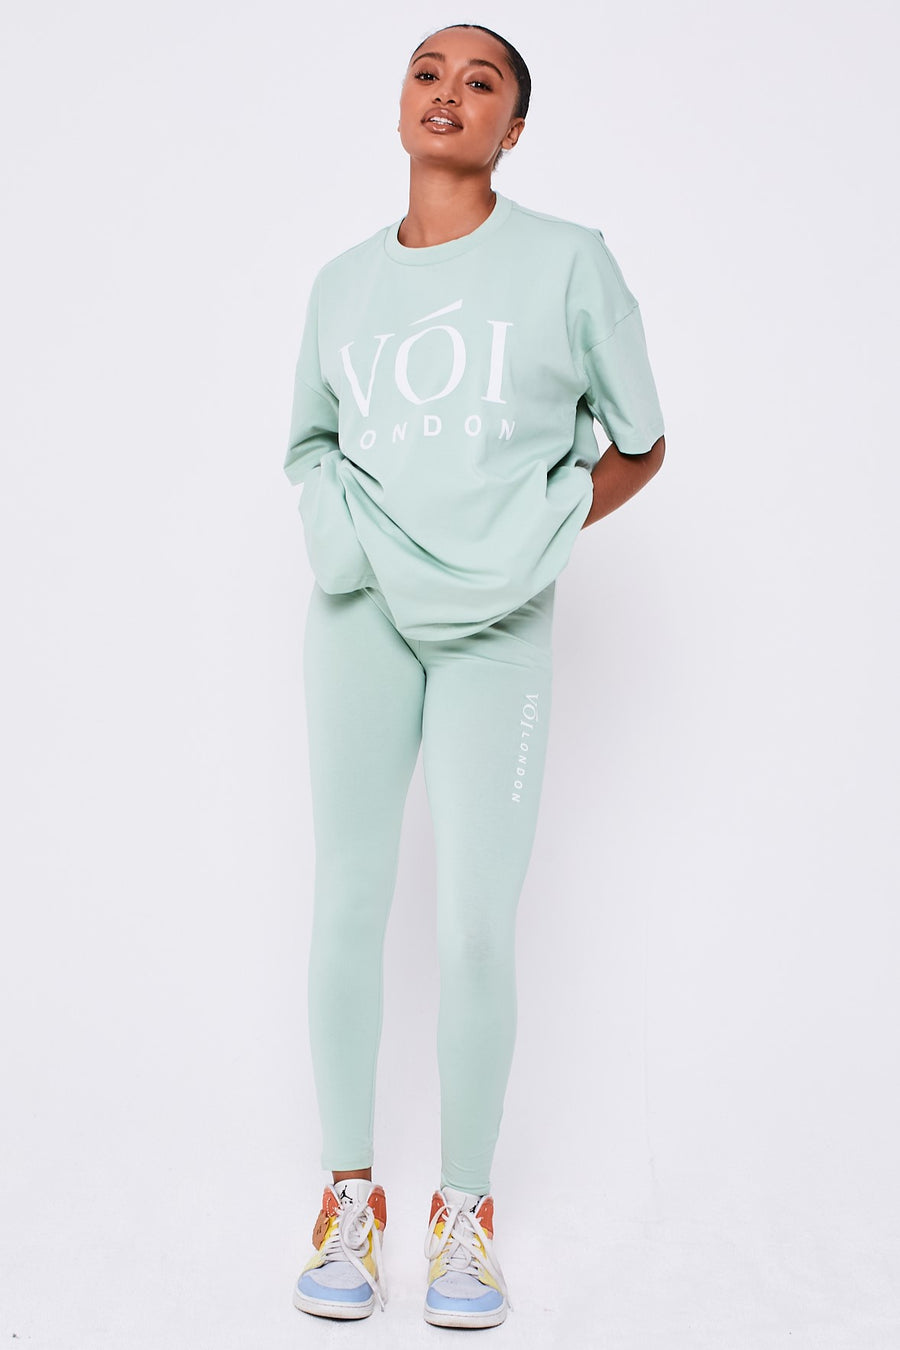 Colindale Co-ord Tee and Legging - Slit Green